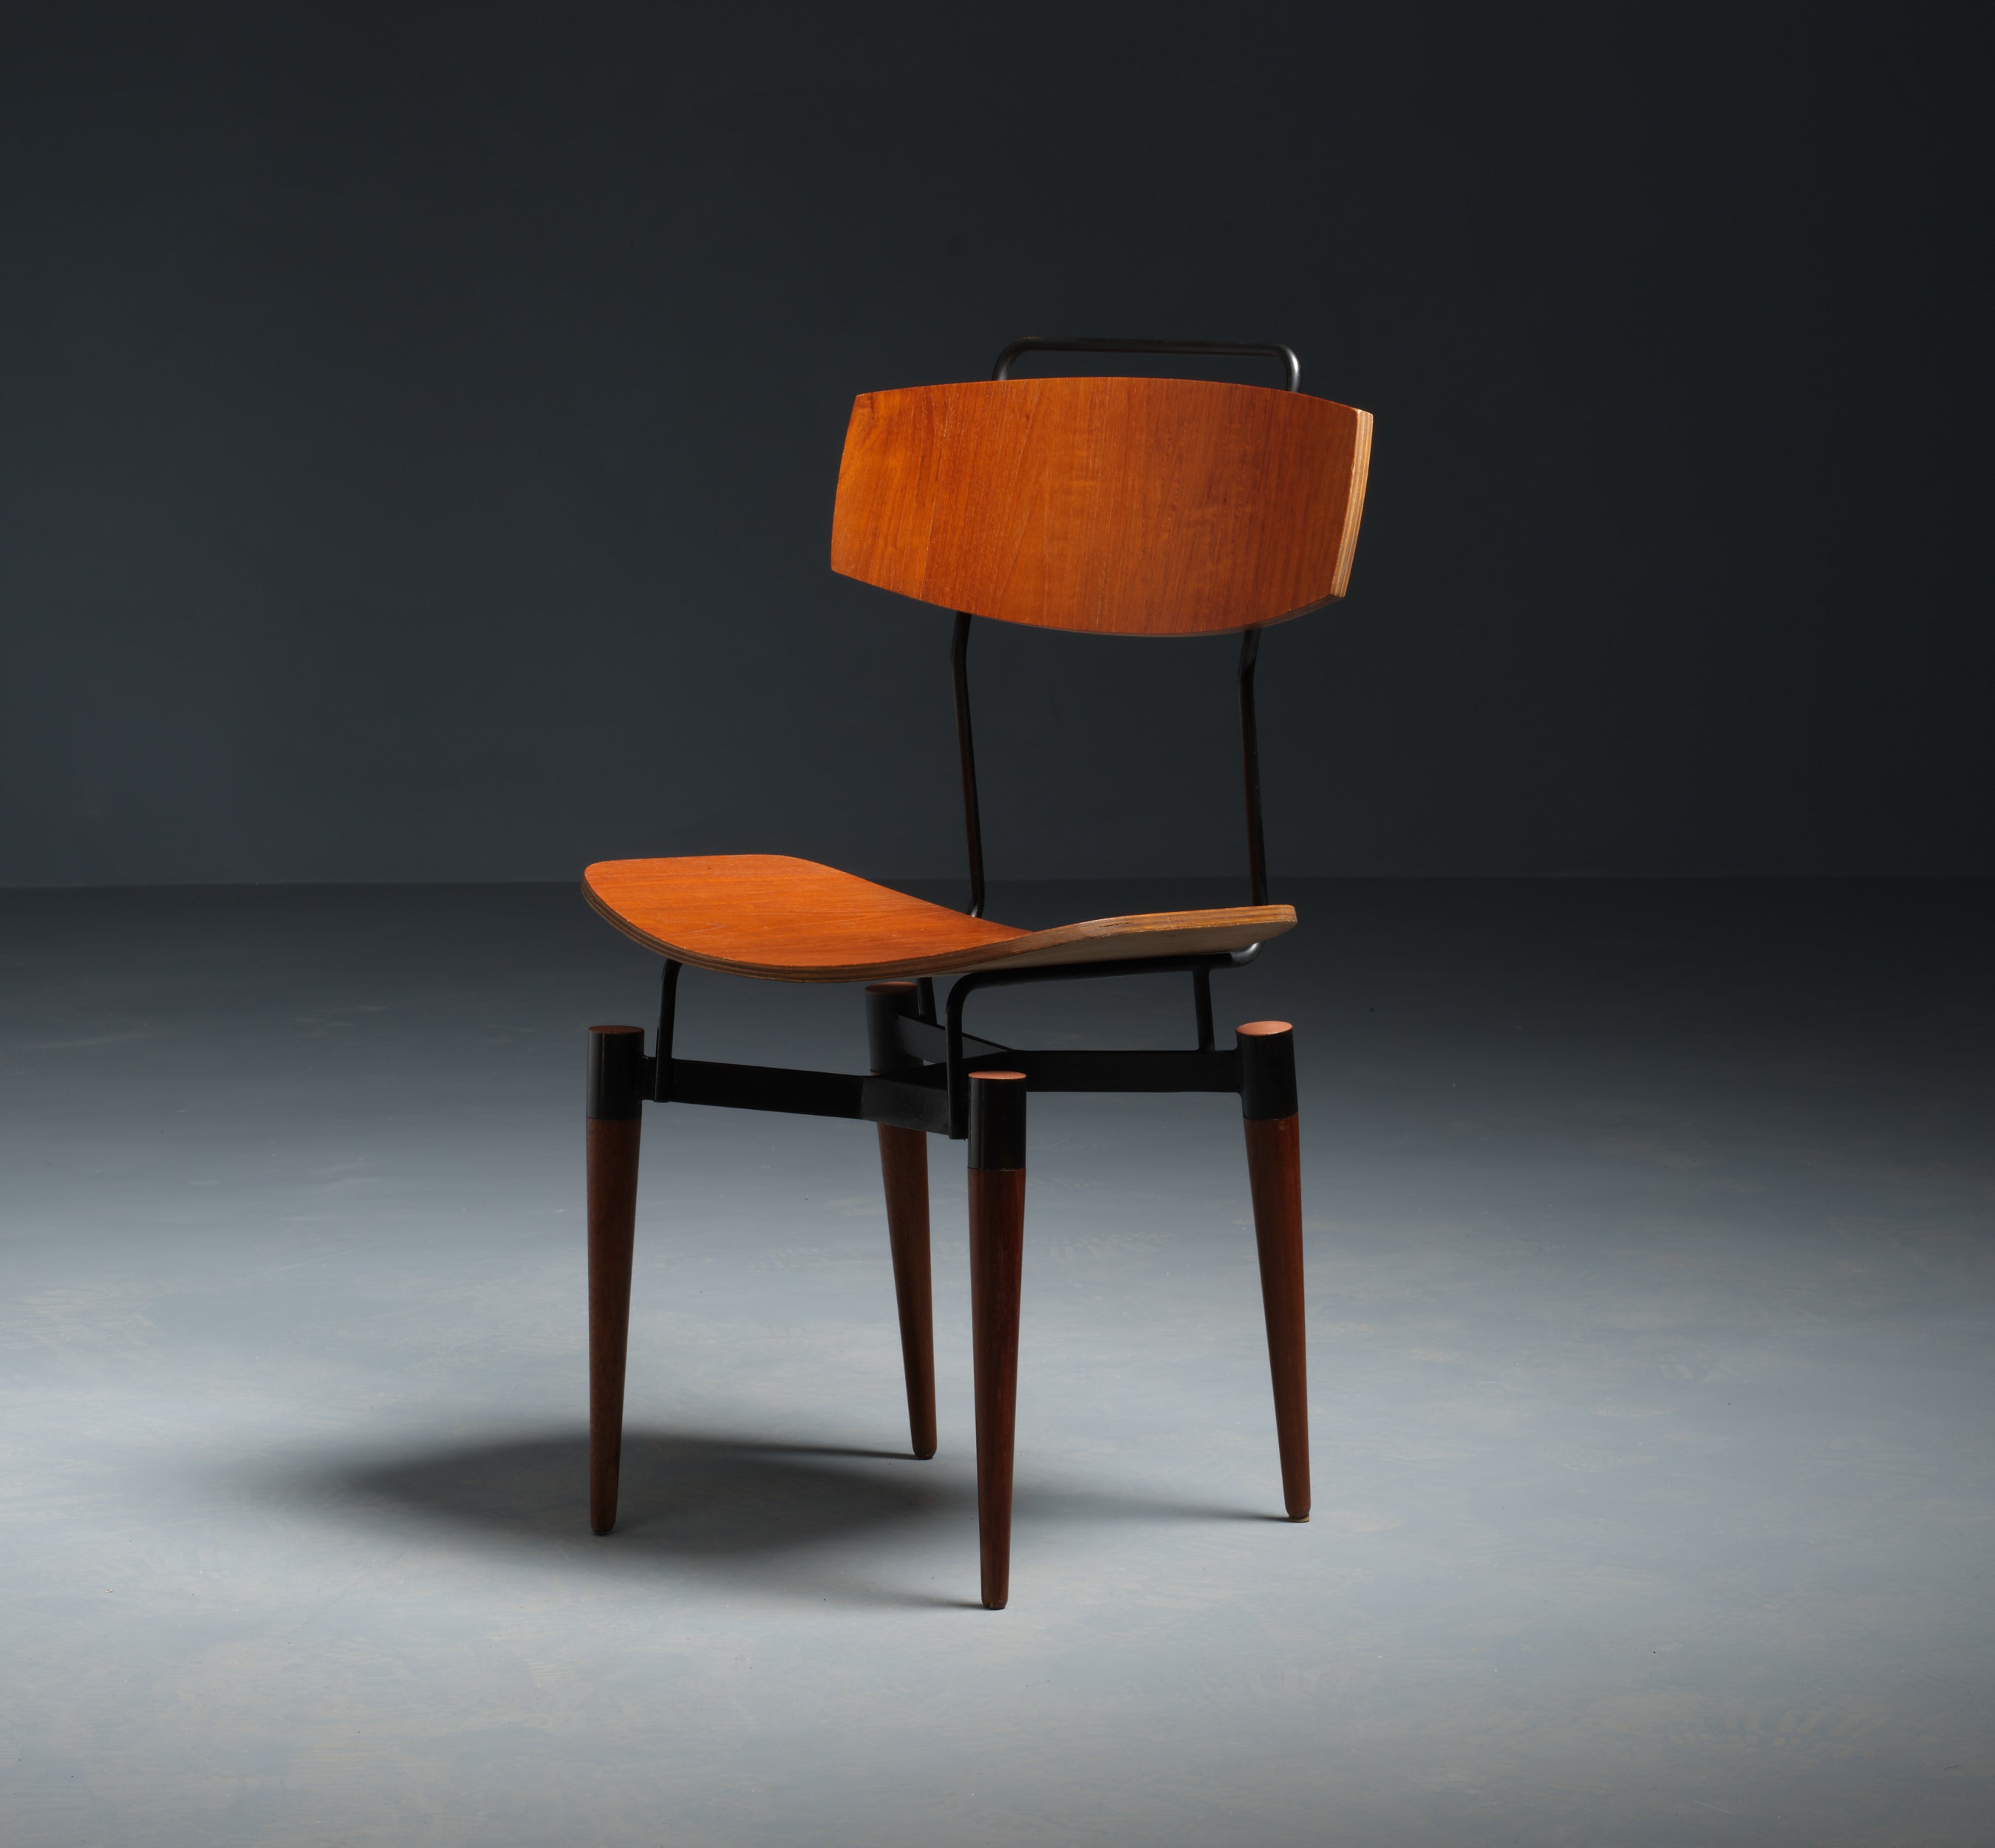 Exquisite Italian Midcentury Desk Chair, a perfect blend of modern design and timeless sophistication. Crafted with meticulous attention to detail and technical precision, this chair boasts a captivating combination of teak wood and sleek black